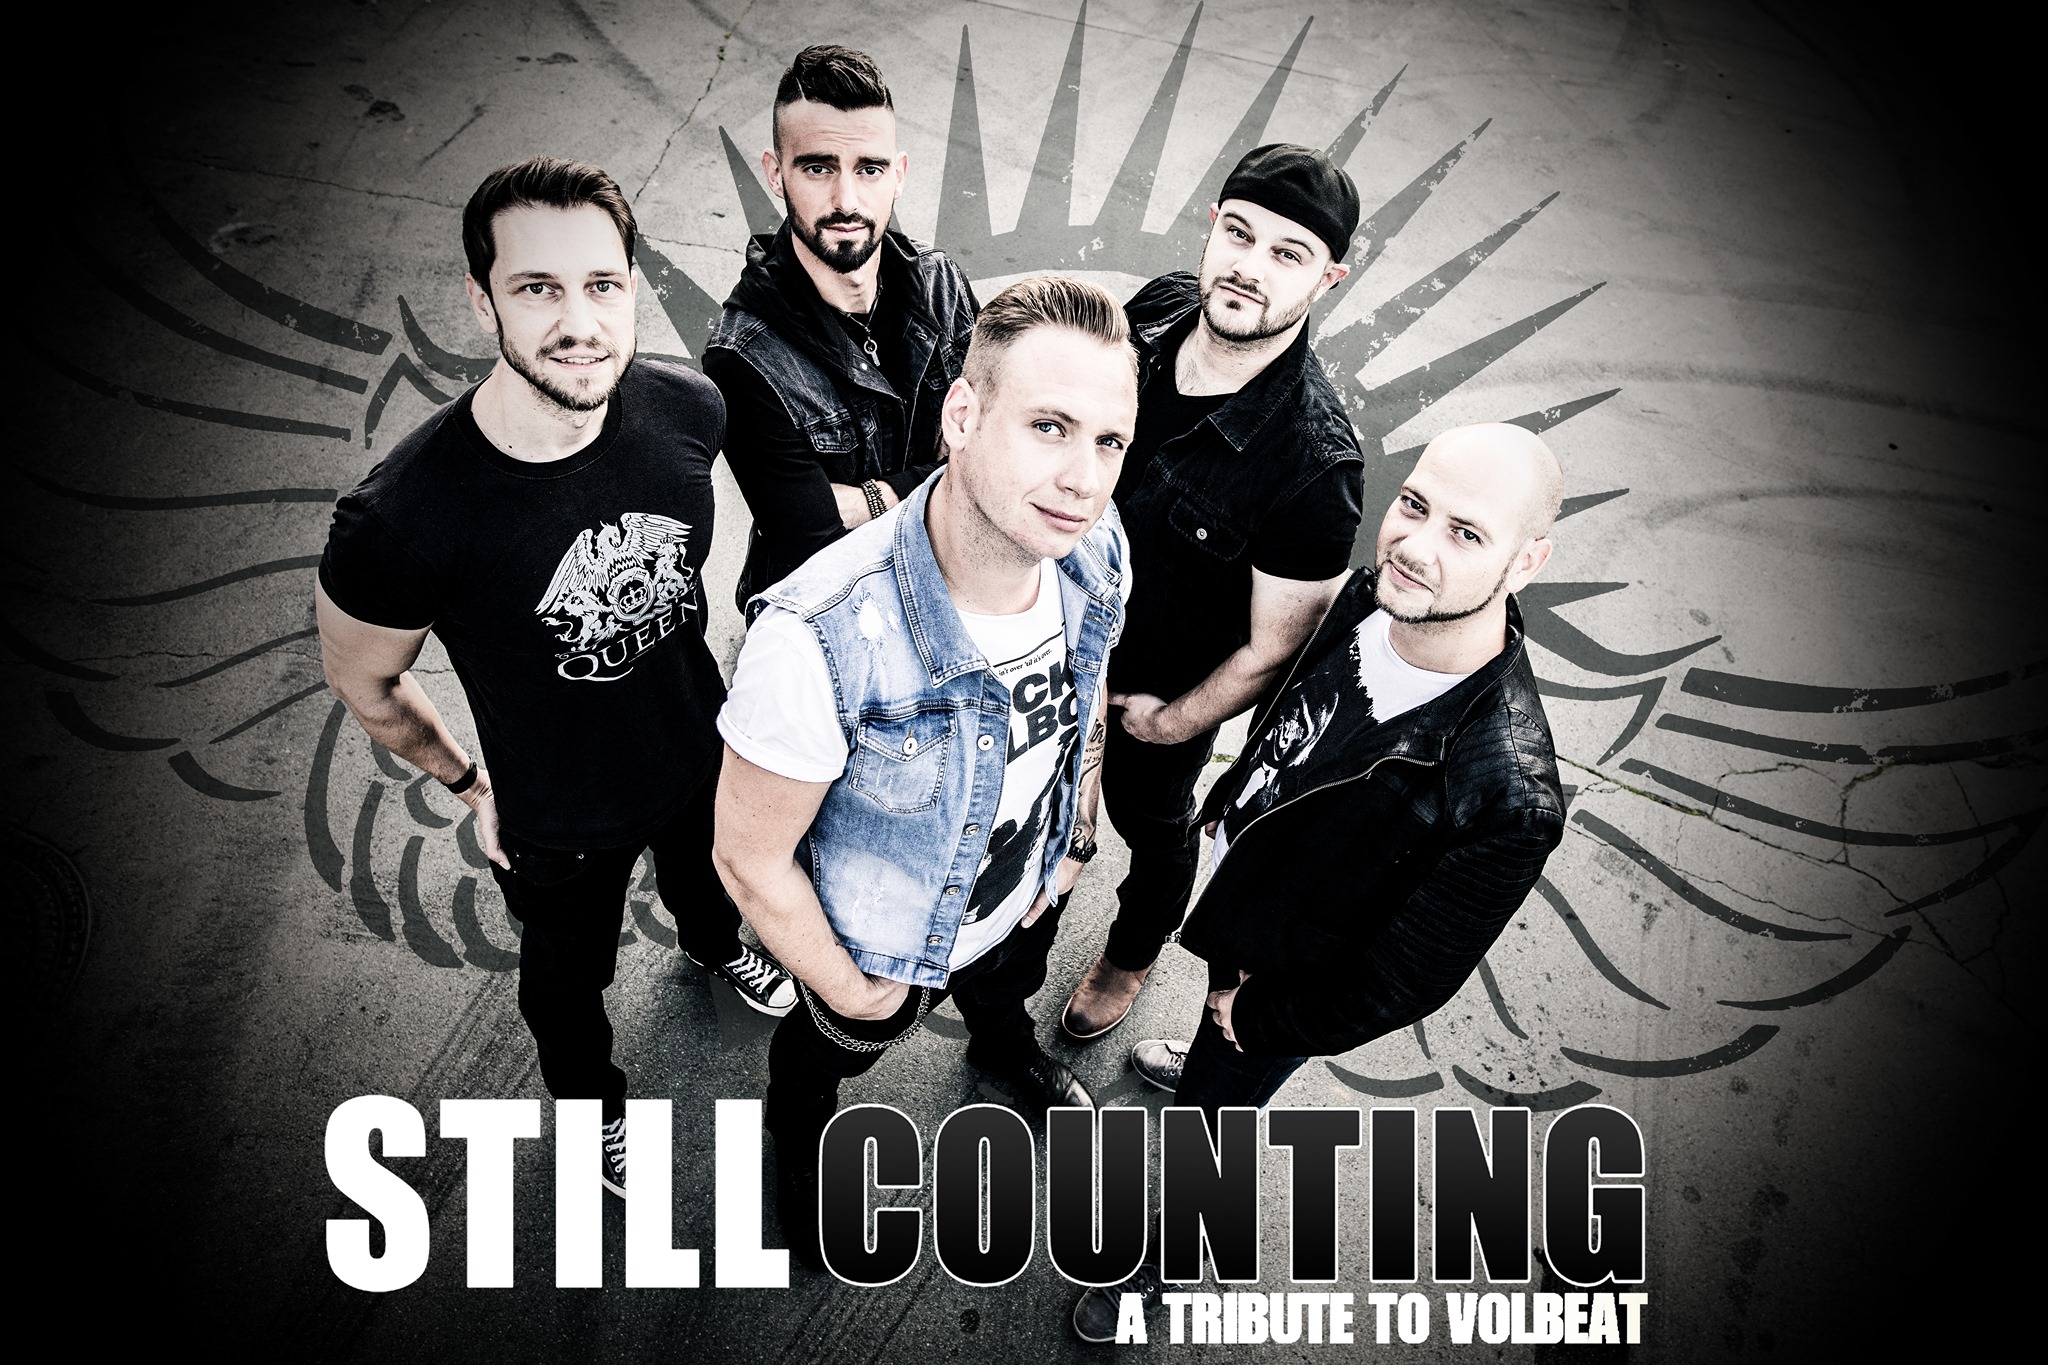 STILL COUNTING - A Tribute to VOLBEAT